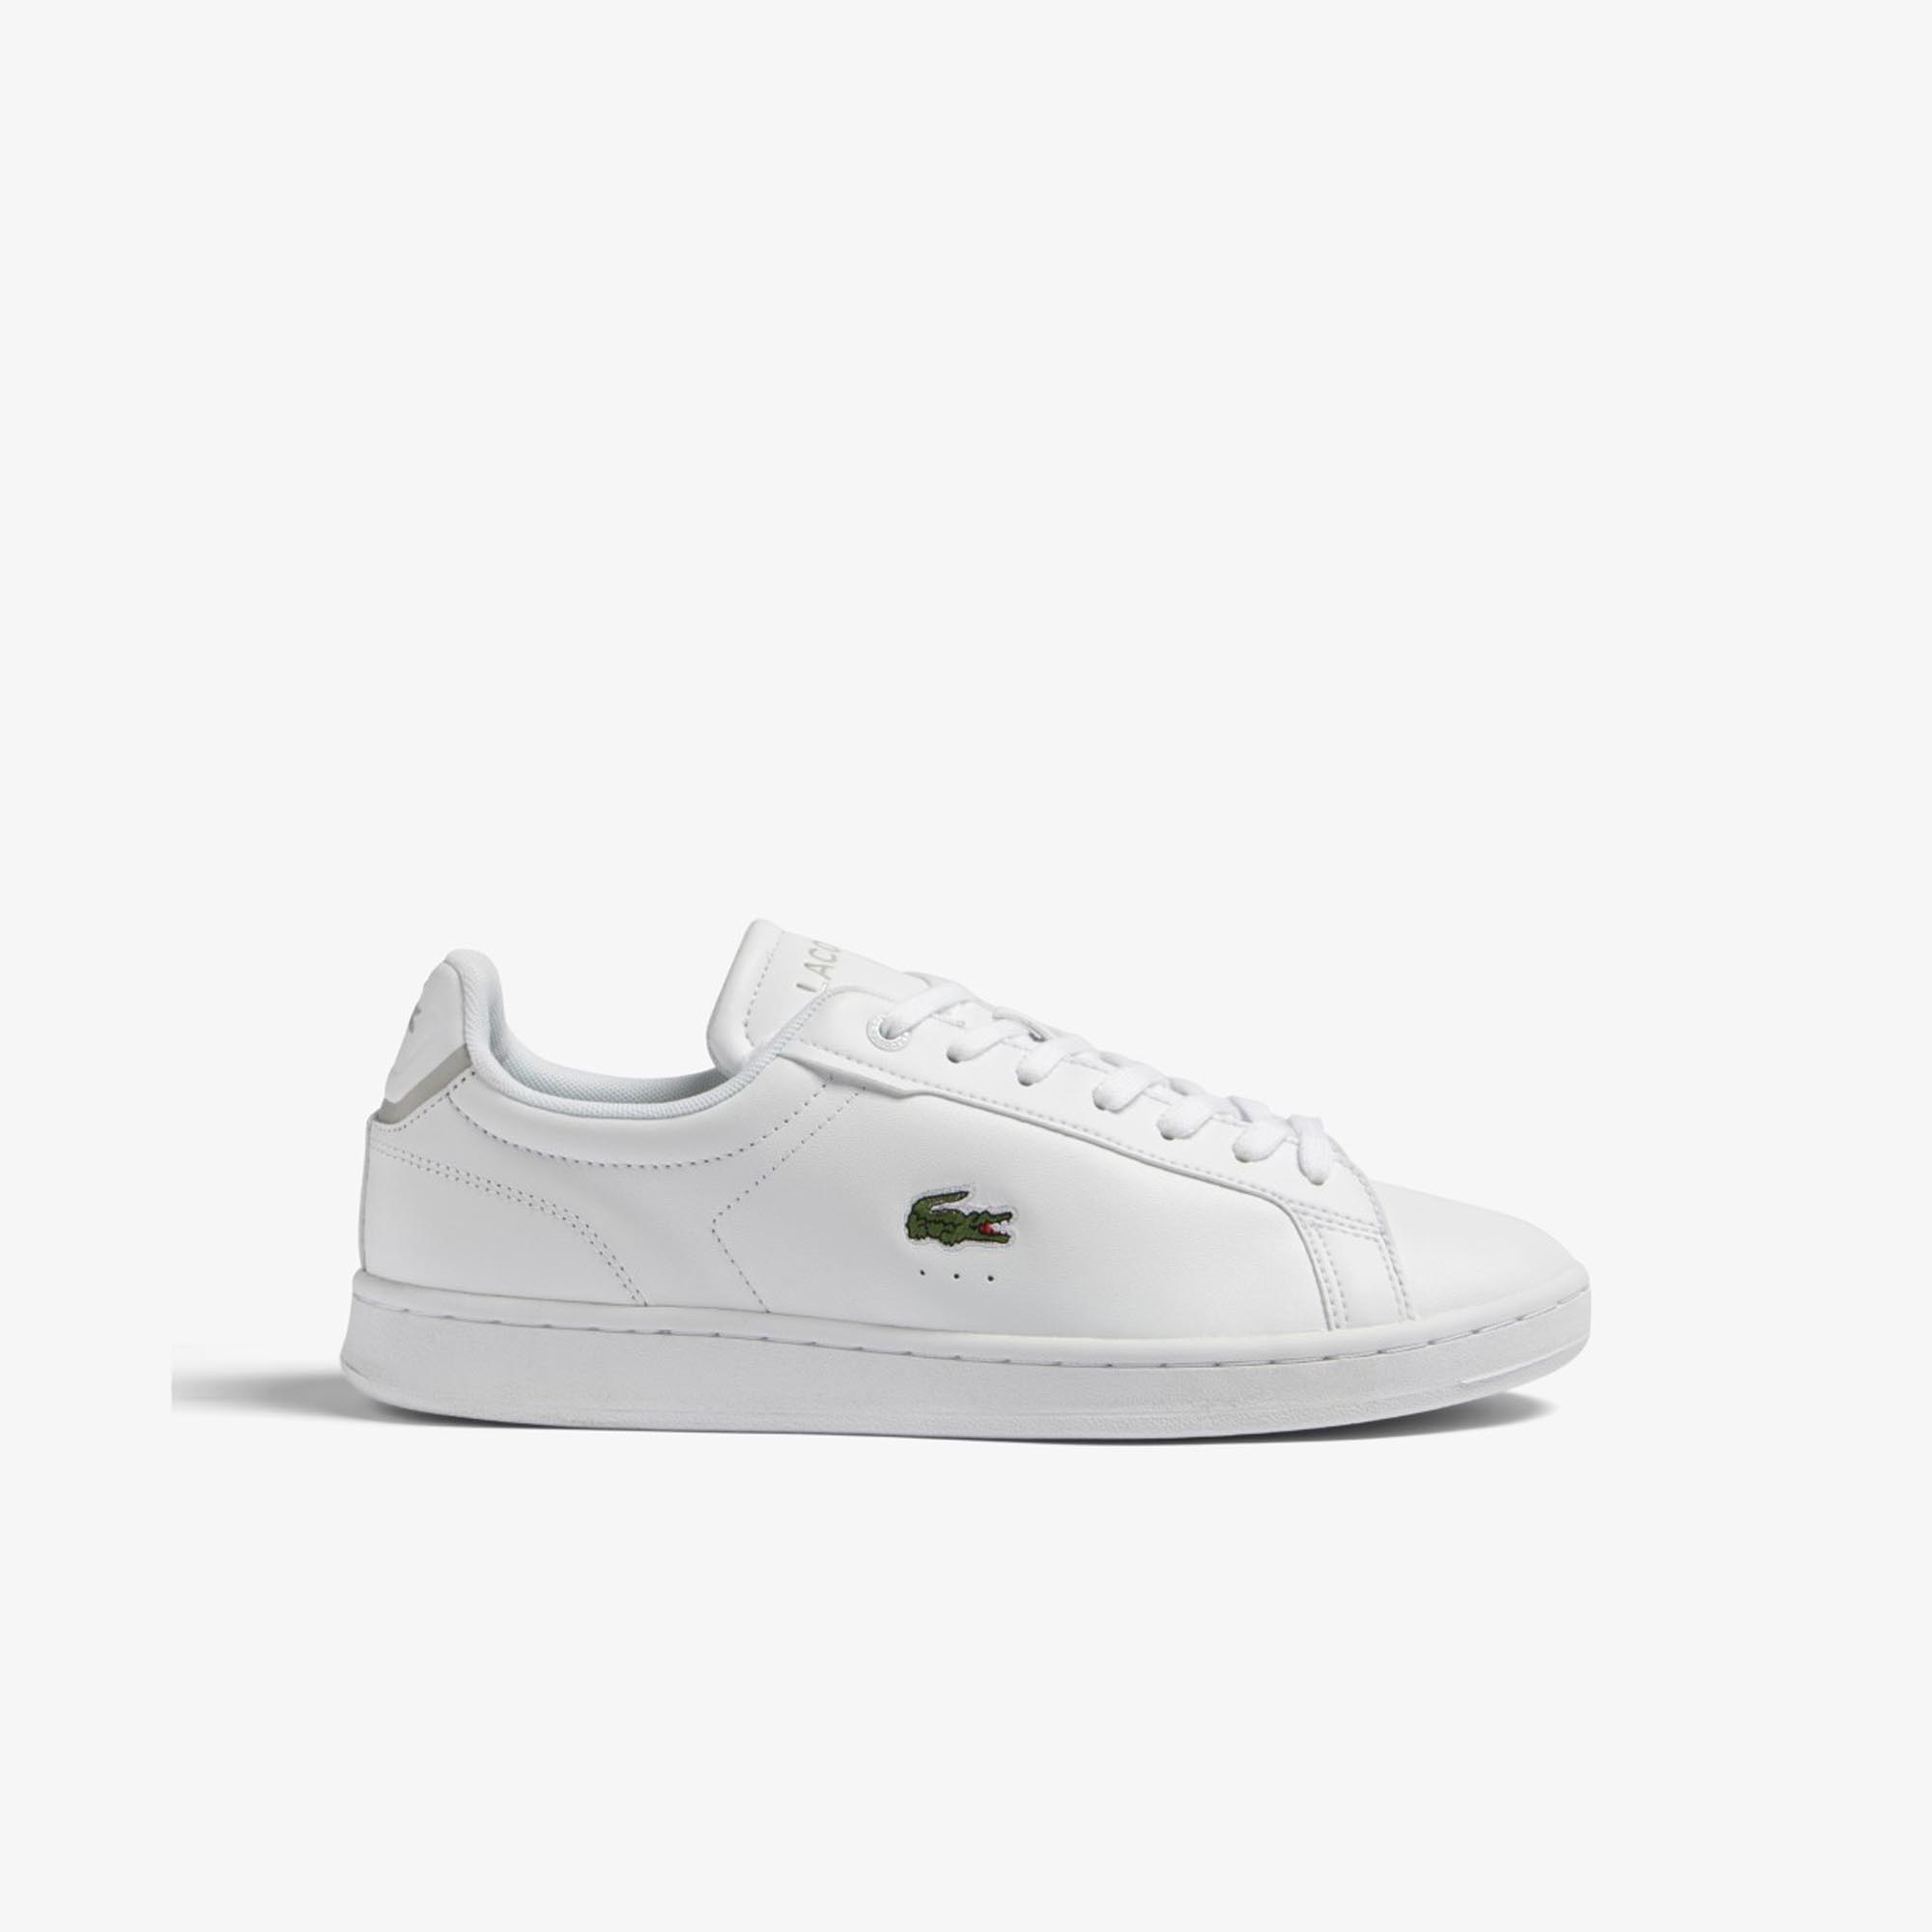 LACOSTE Carnaby Pro BL23 Heren